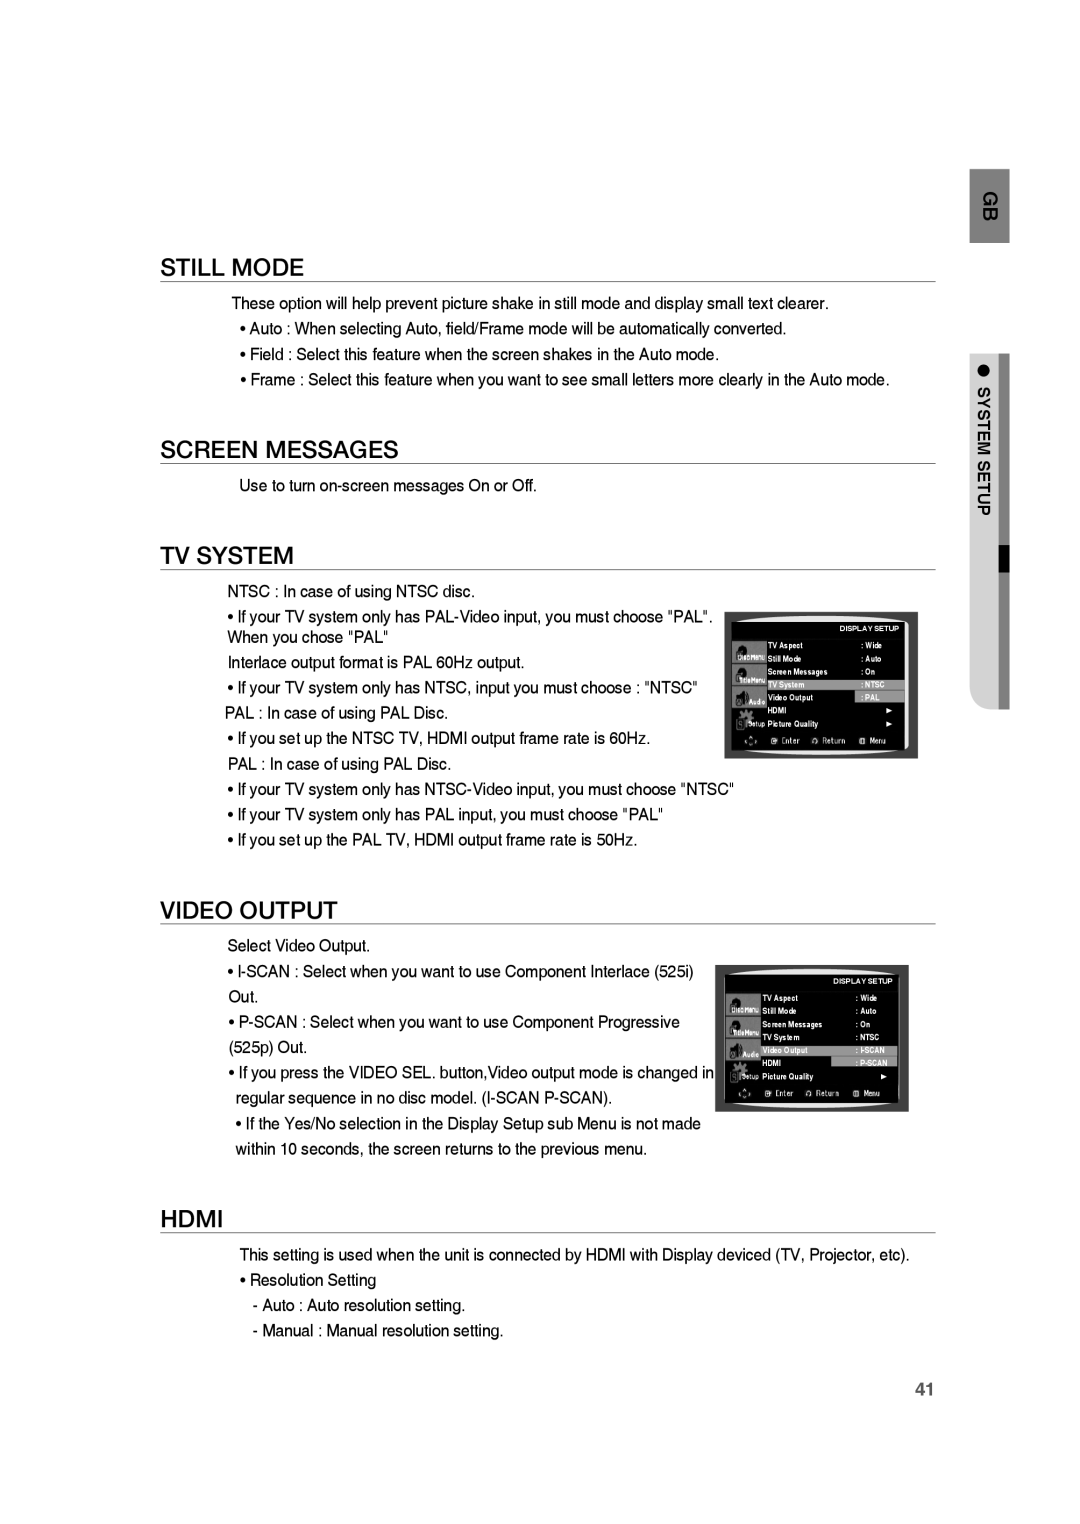 Samsung HE10T user manual Still Mode, Screen Messages, Tv System, Video Output, Hdmi, System Setup 